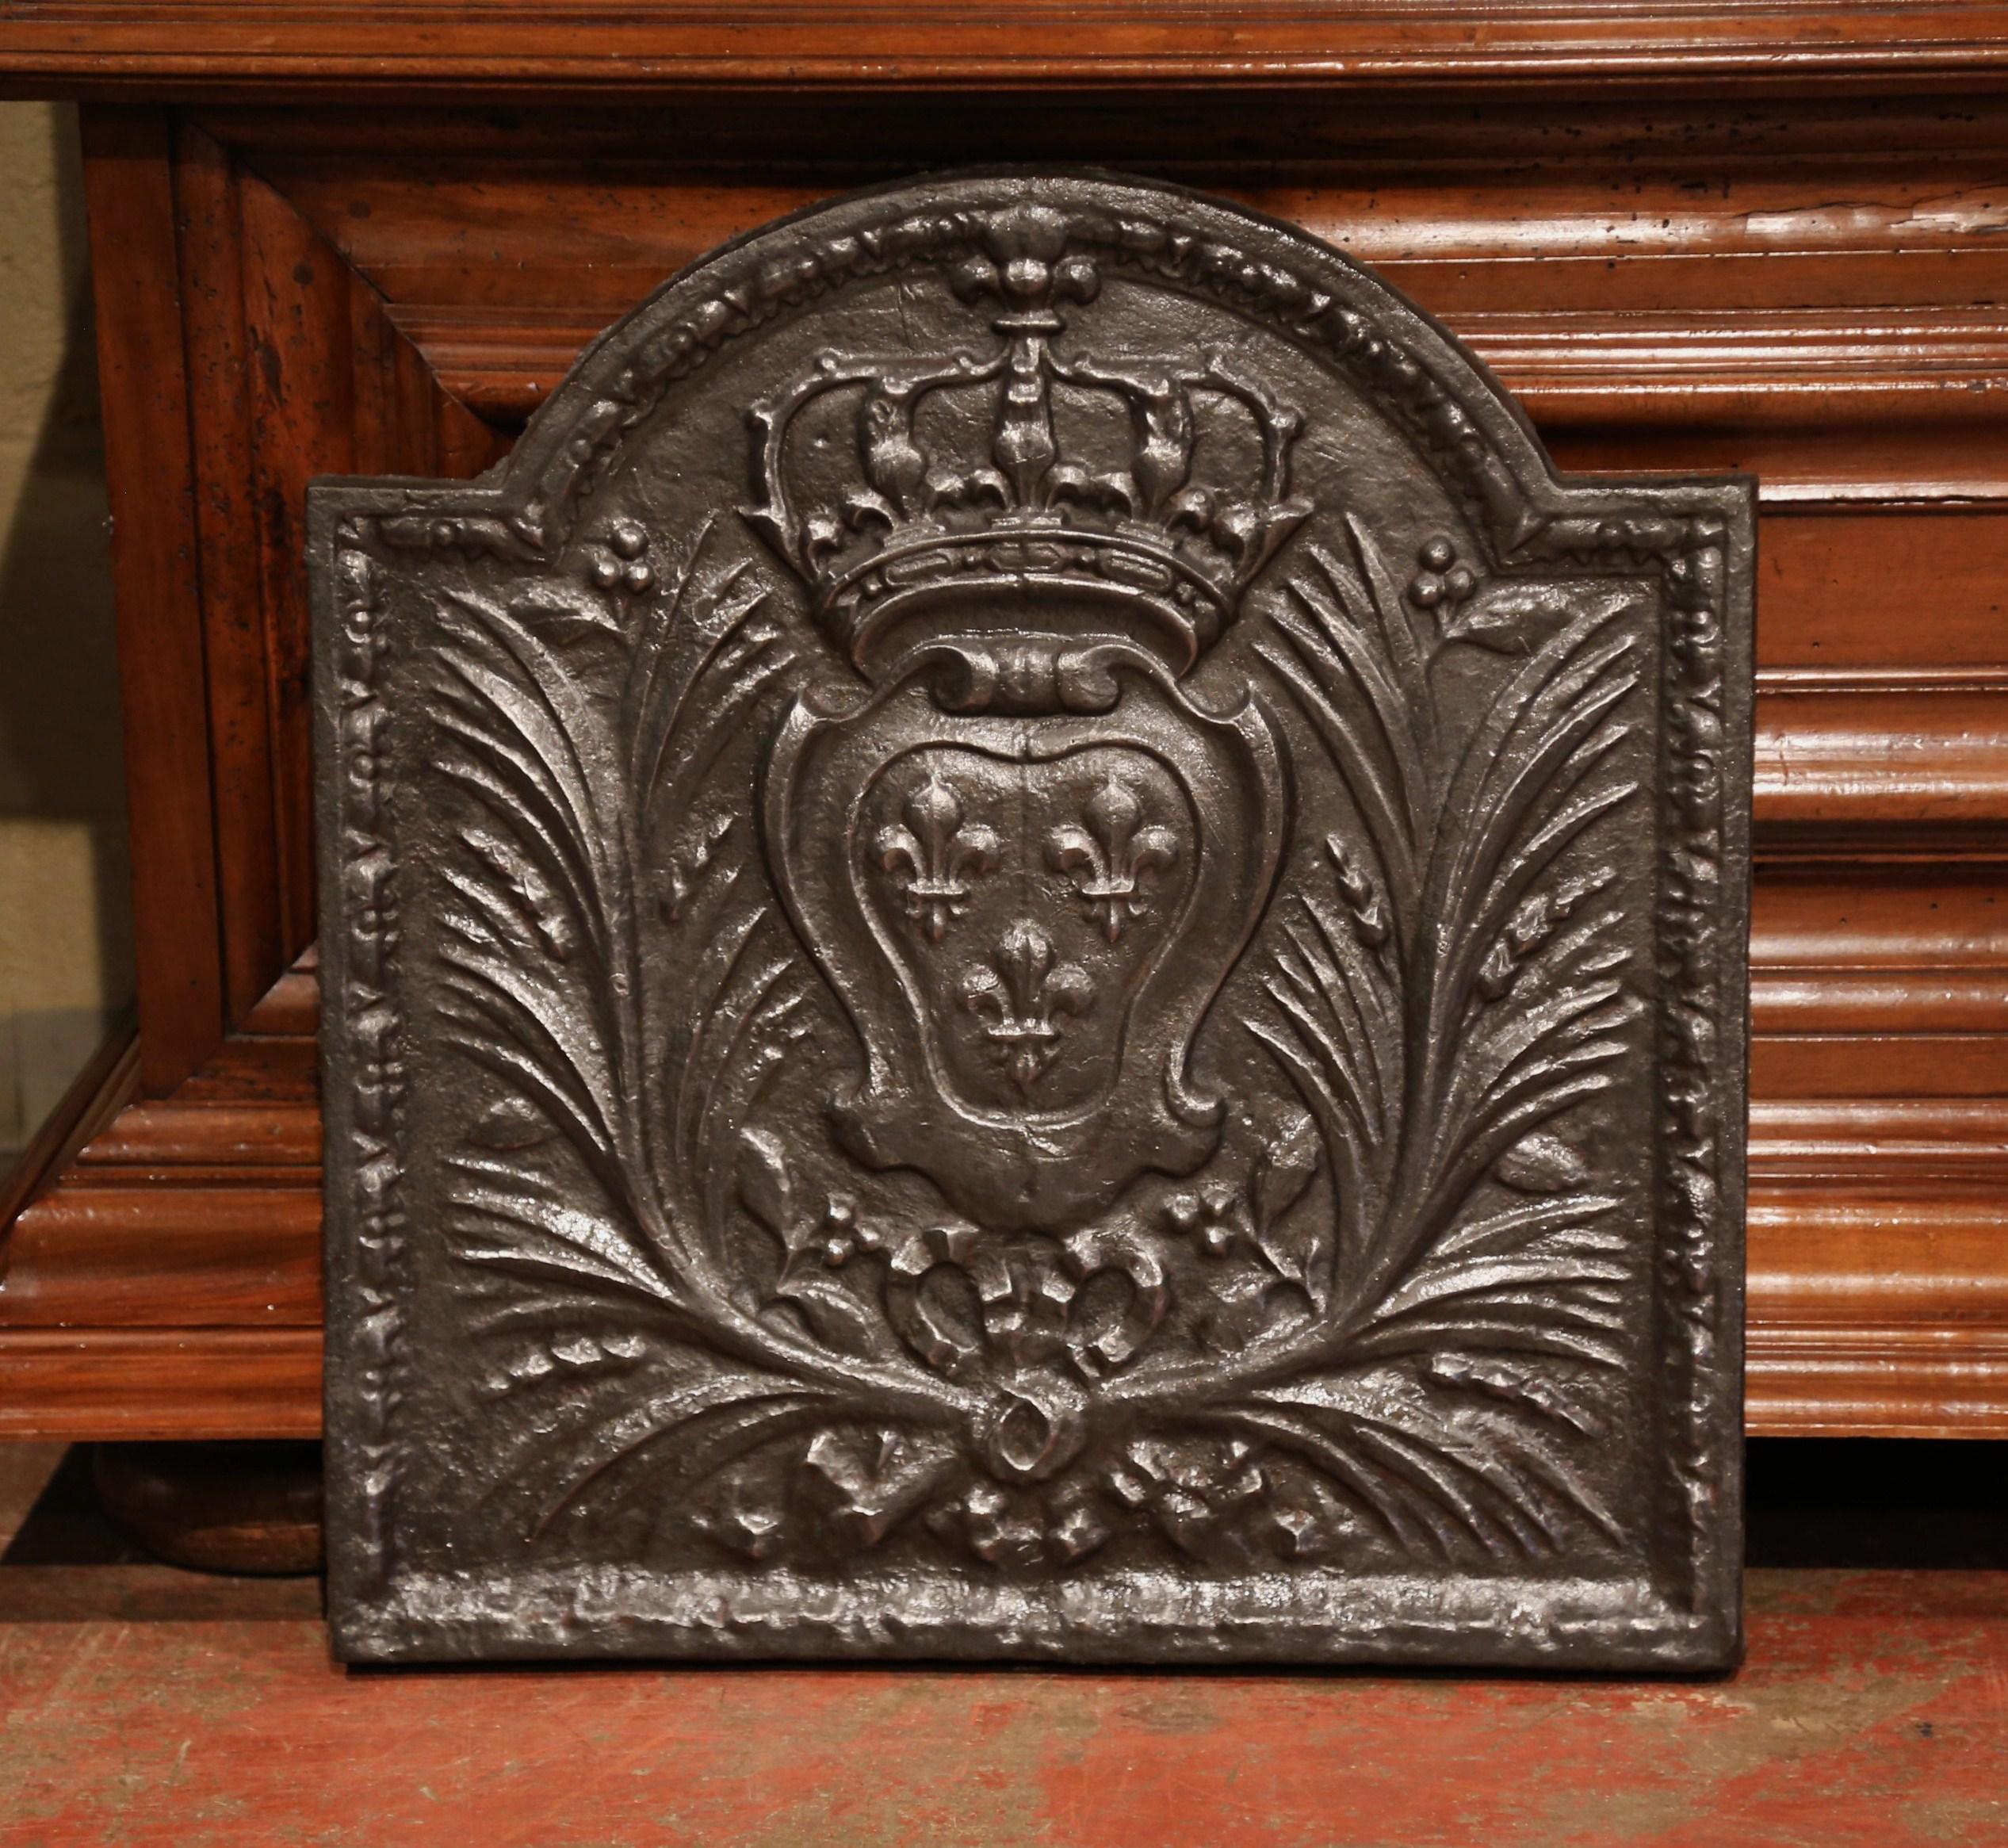 Hand-Carved 19th Century Iron Fireback with French Royal Coat of Arms and Fleurs-de-Lys